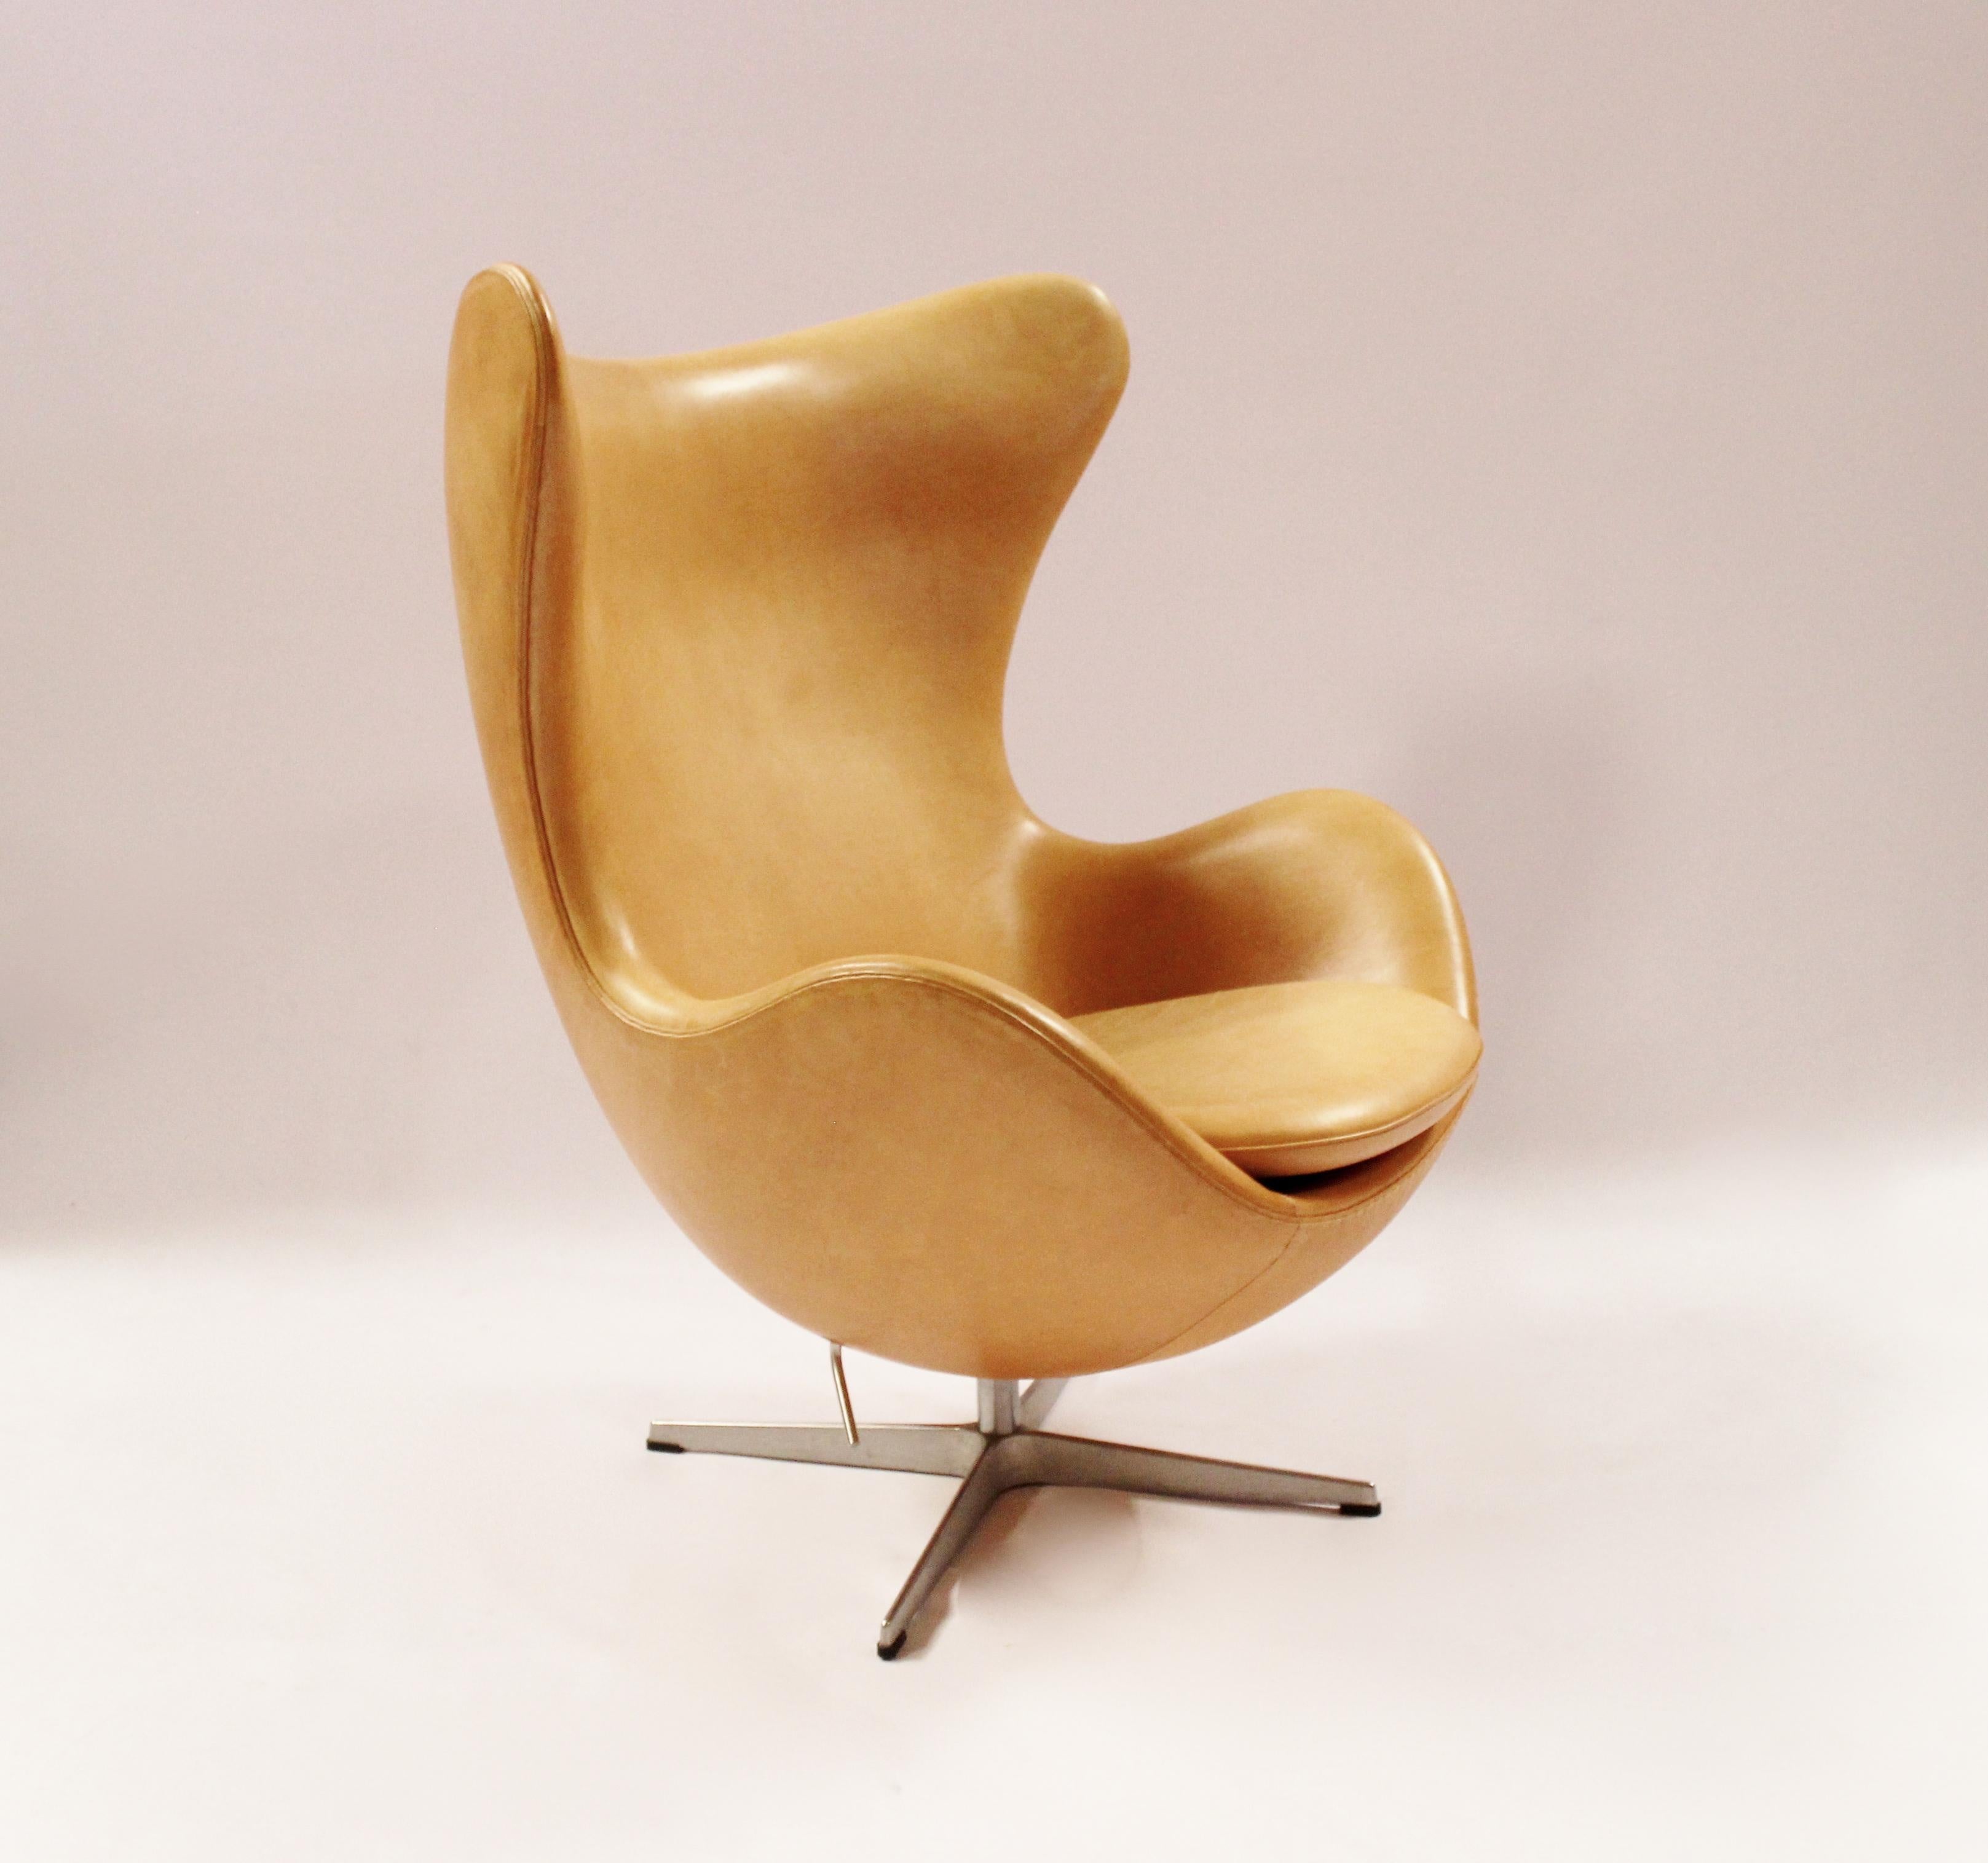 The Egg, model 3316 and stool, model 3127, designed by Arne Jacobsen in 1958 and manufactured by Fritz Hansen in 2003. The chair and stool are originally upholstered with vegetal patinated leather and are in great vintage condition.